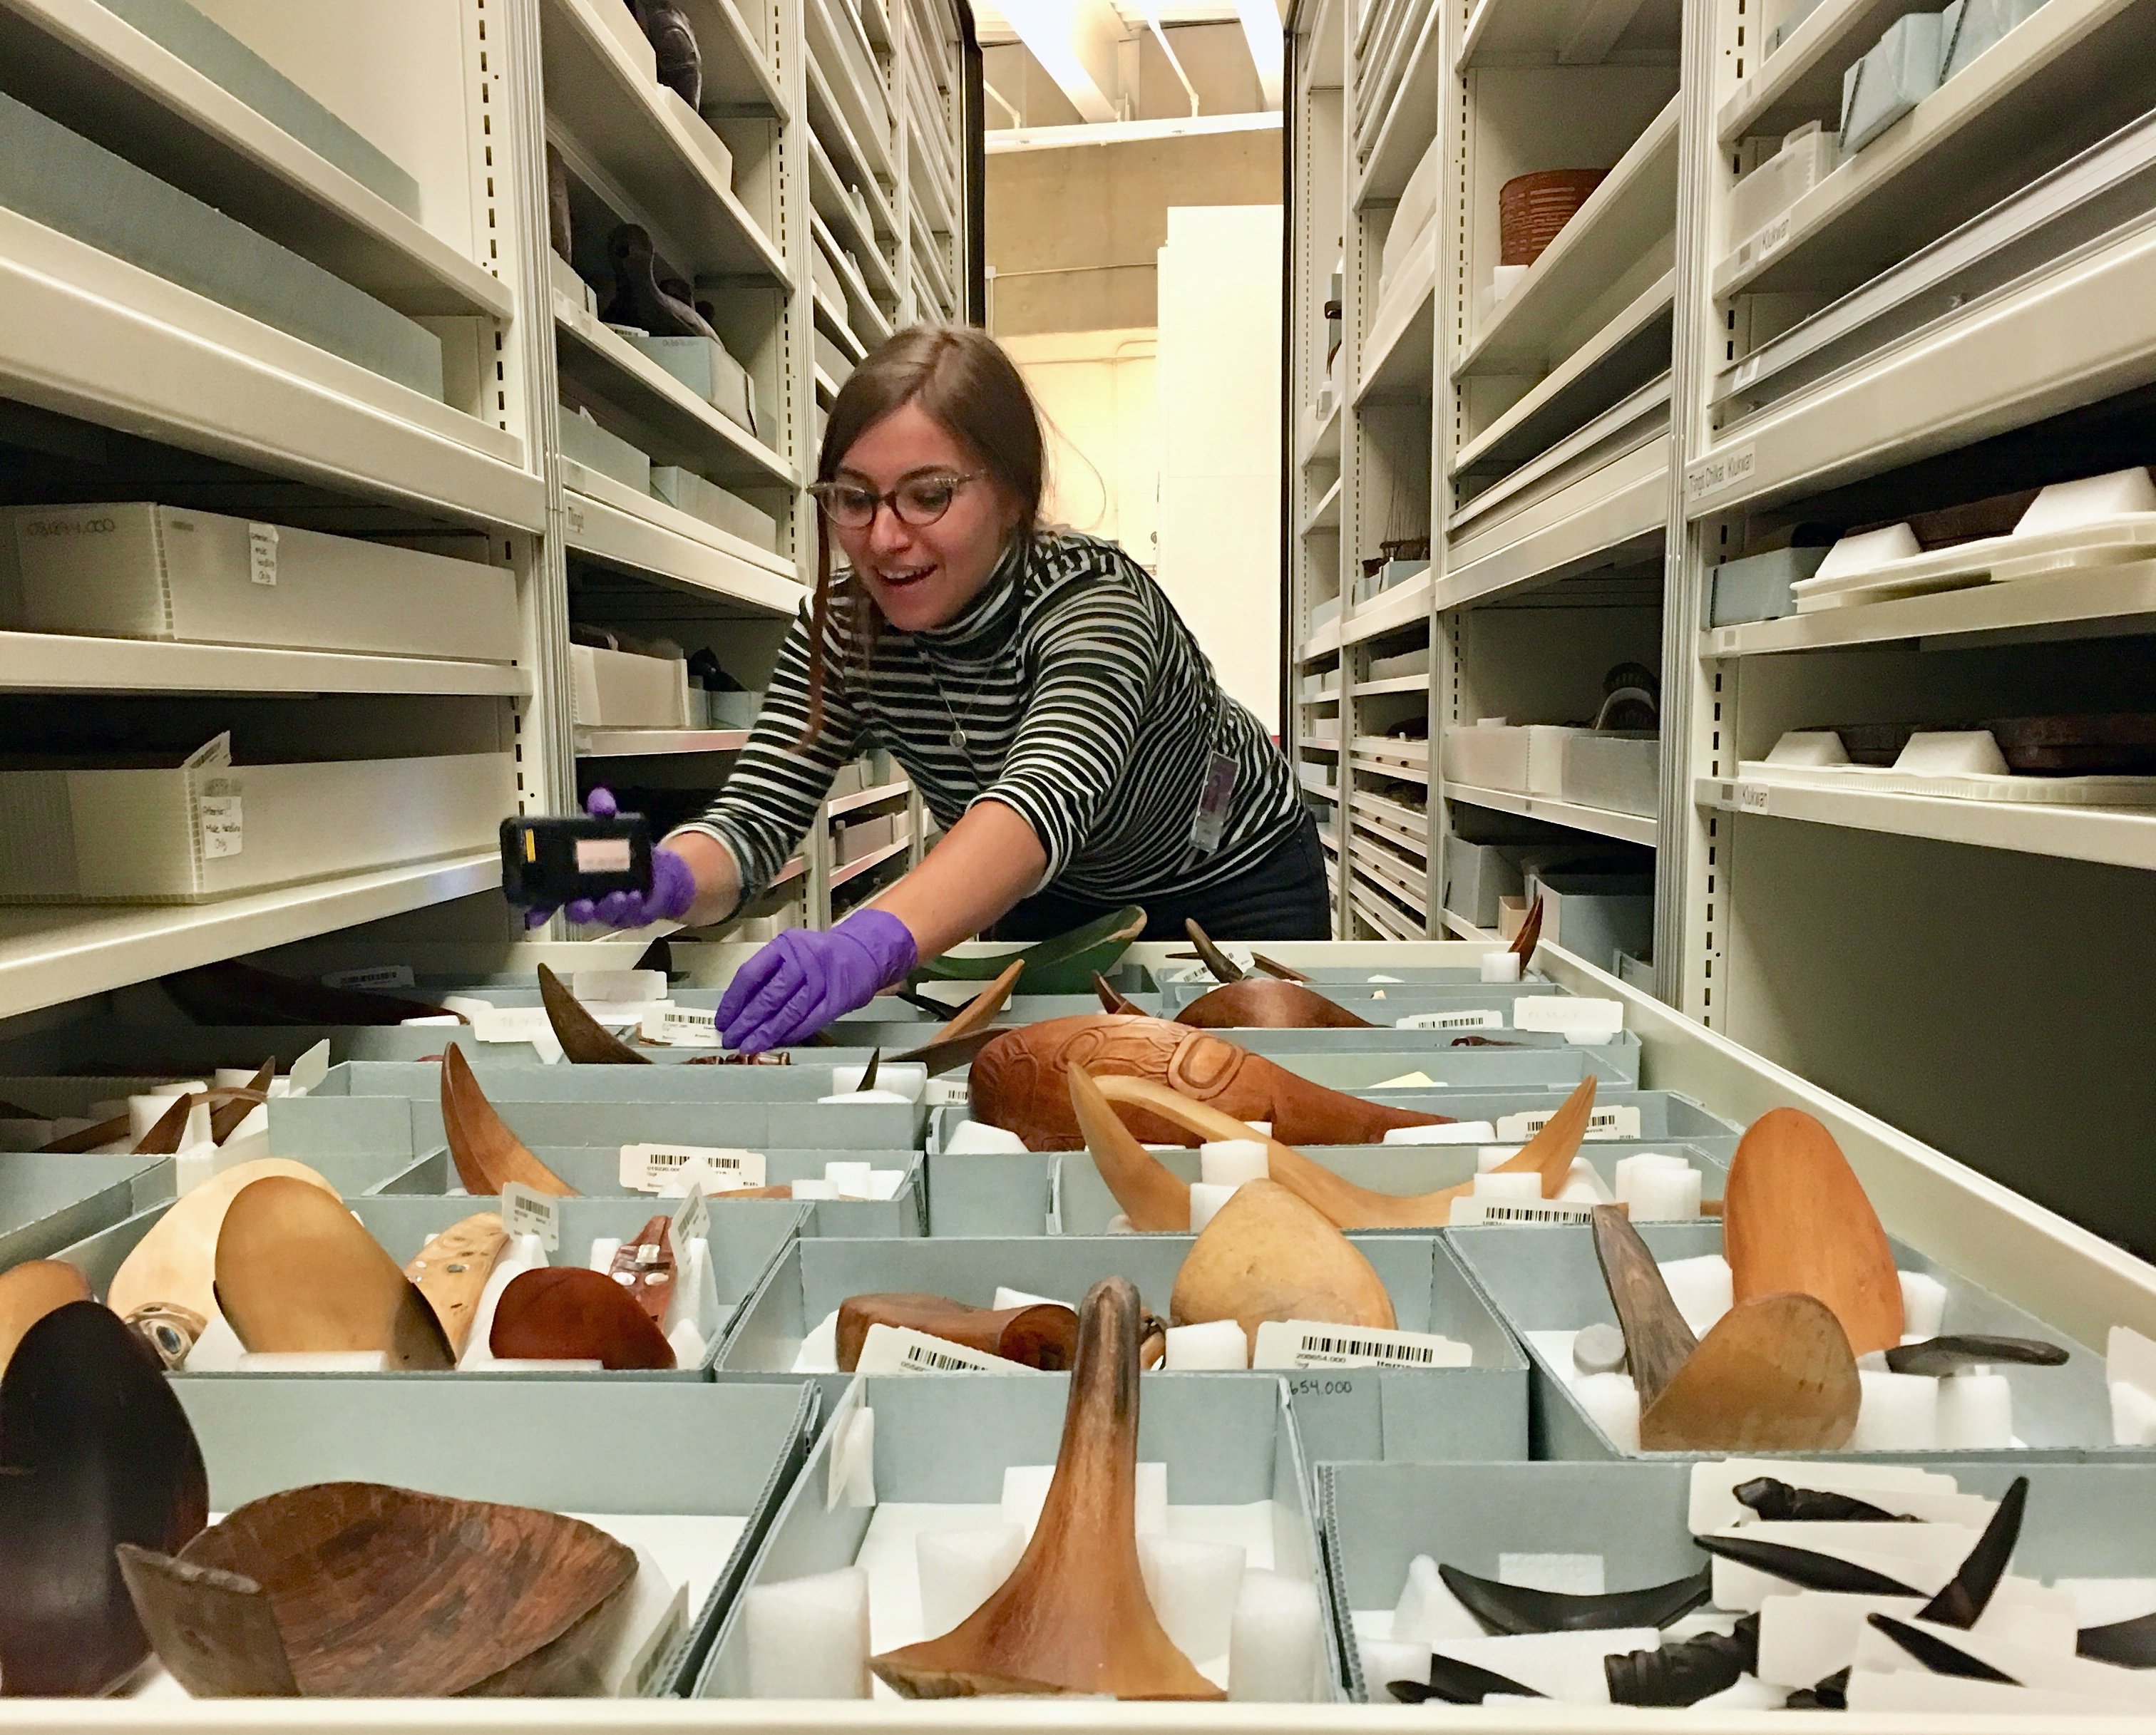 Lauren Comba works with a collection of spoons crafted by Indigenous peoples as part of her internship at the Smithsonian. (Photo: Supplied)